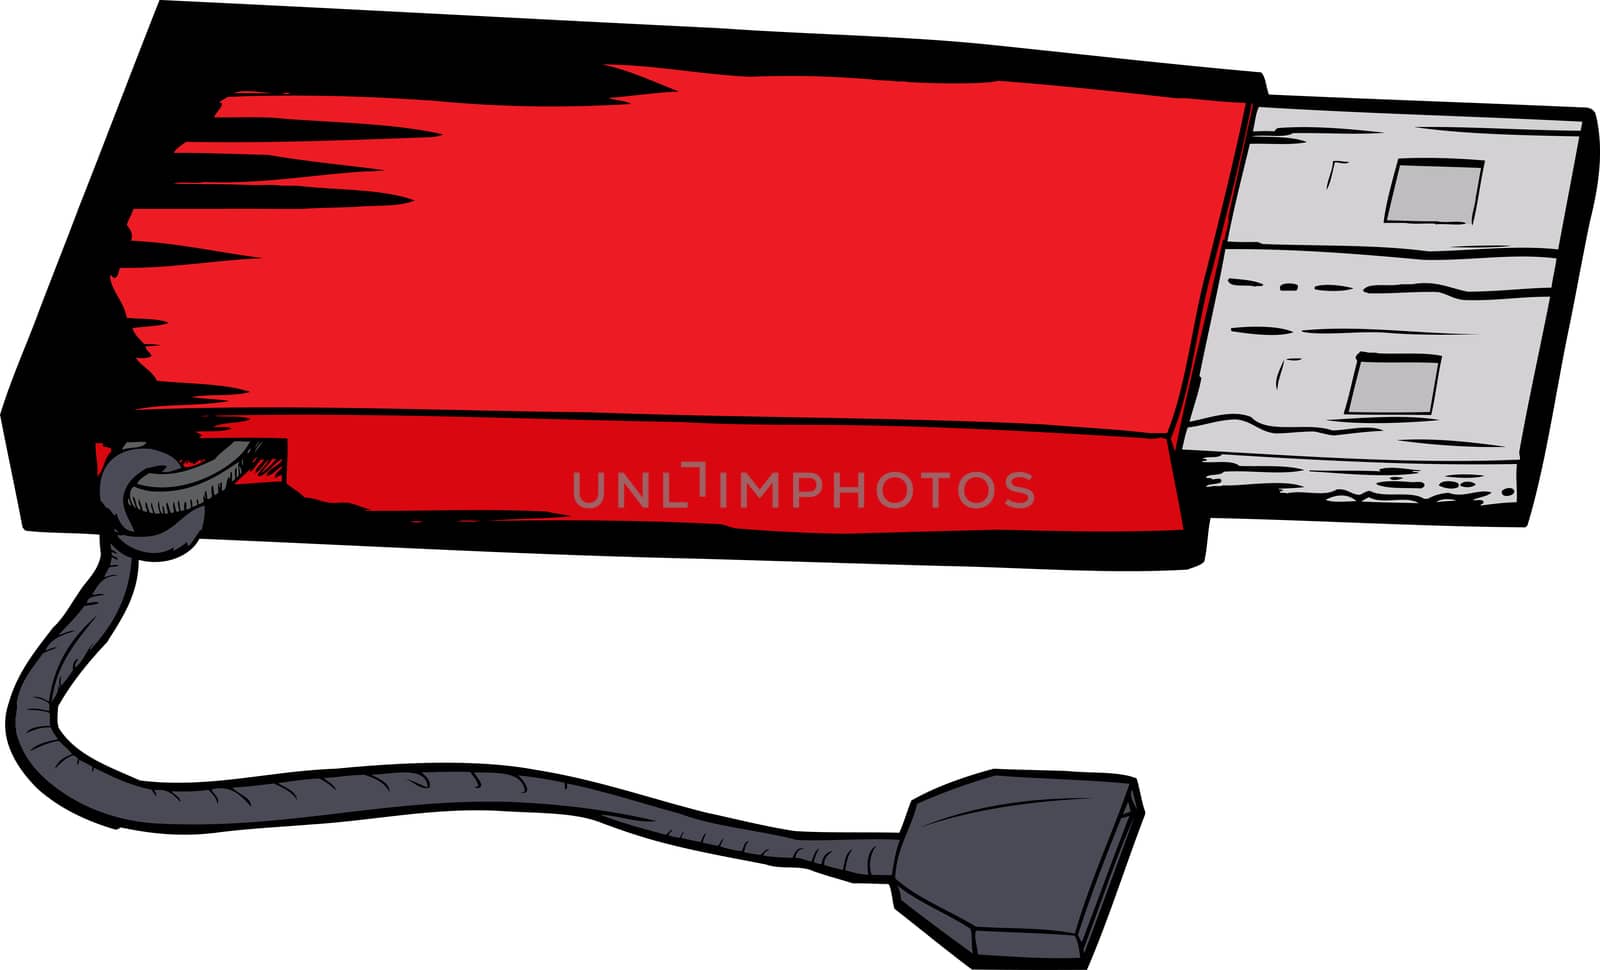 Isolated illustration of single USB flash drive with string